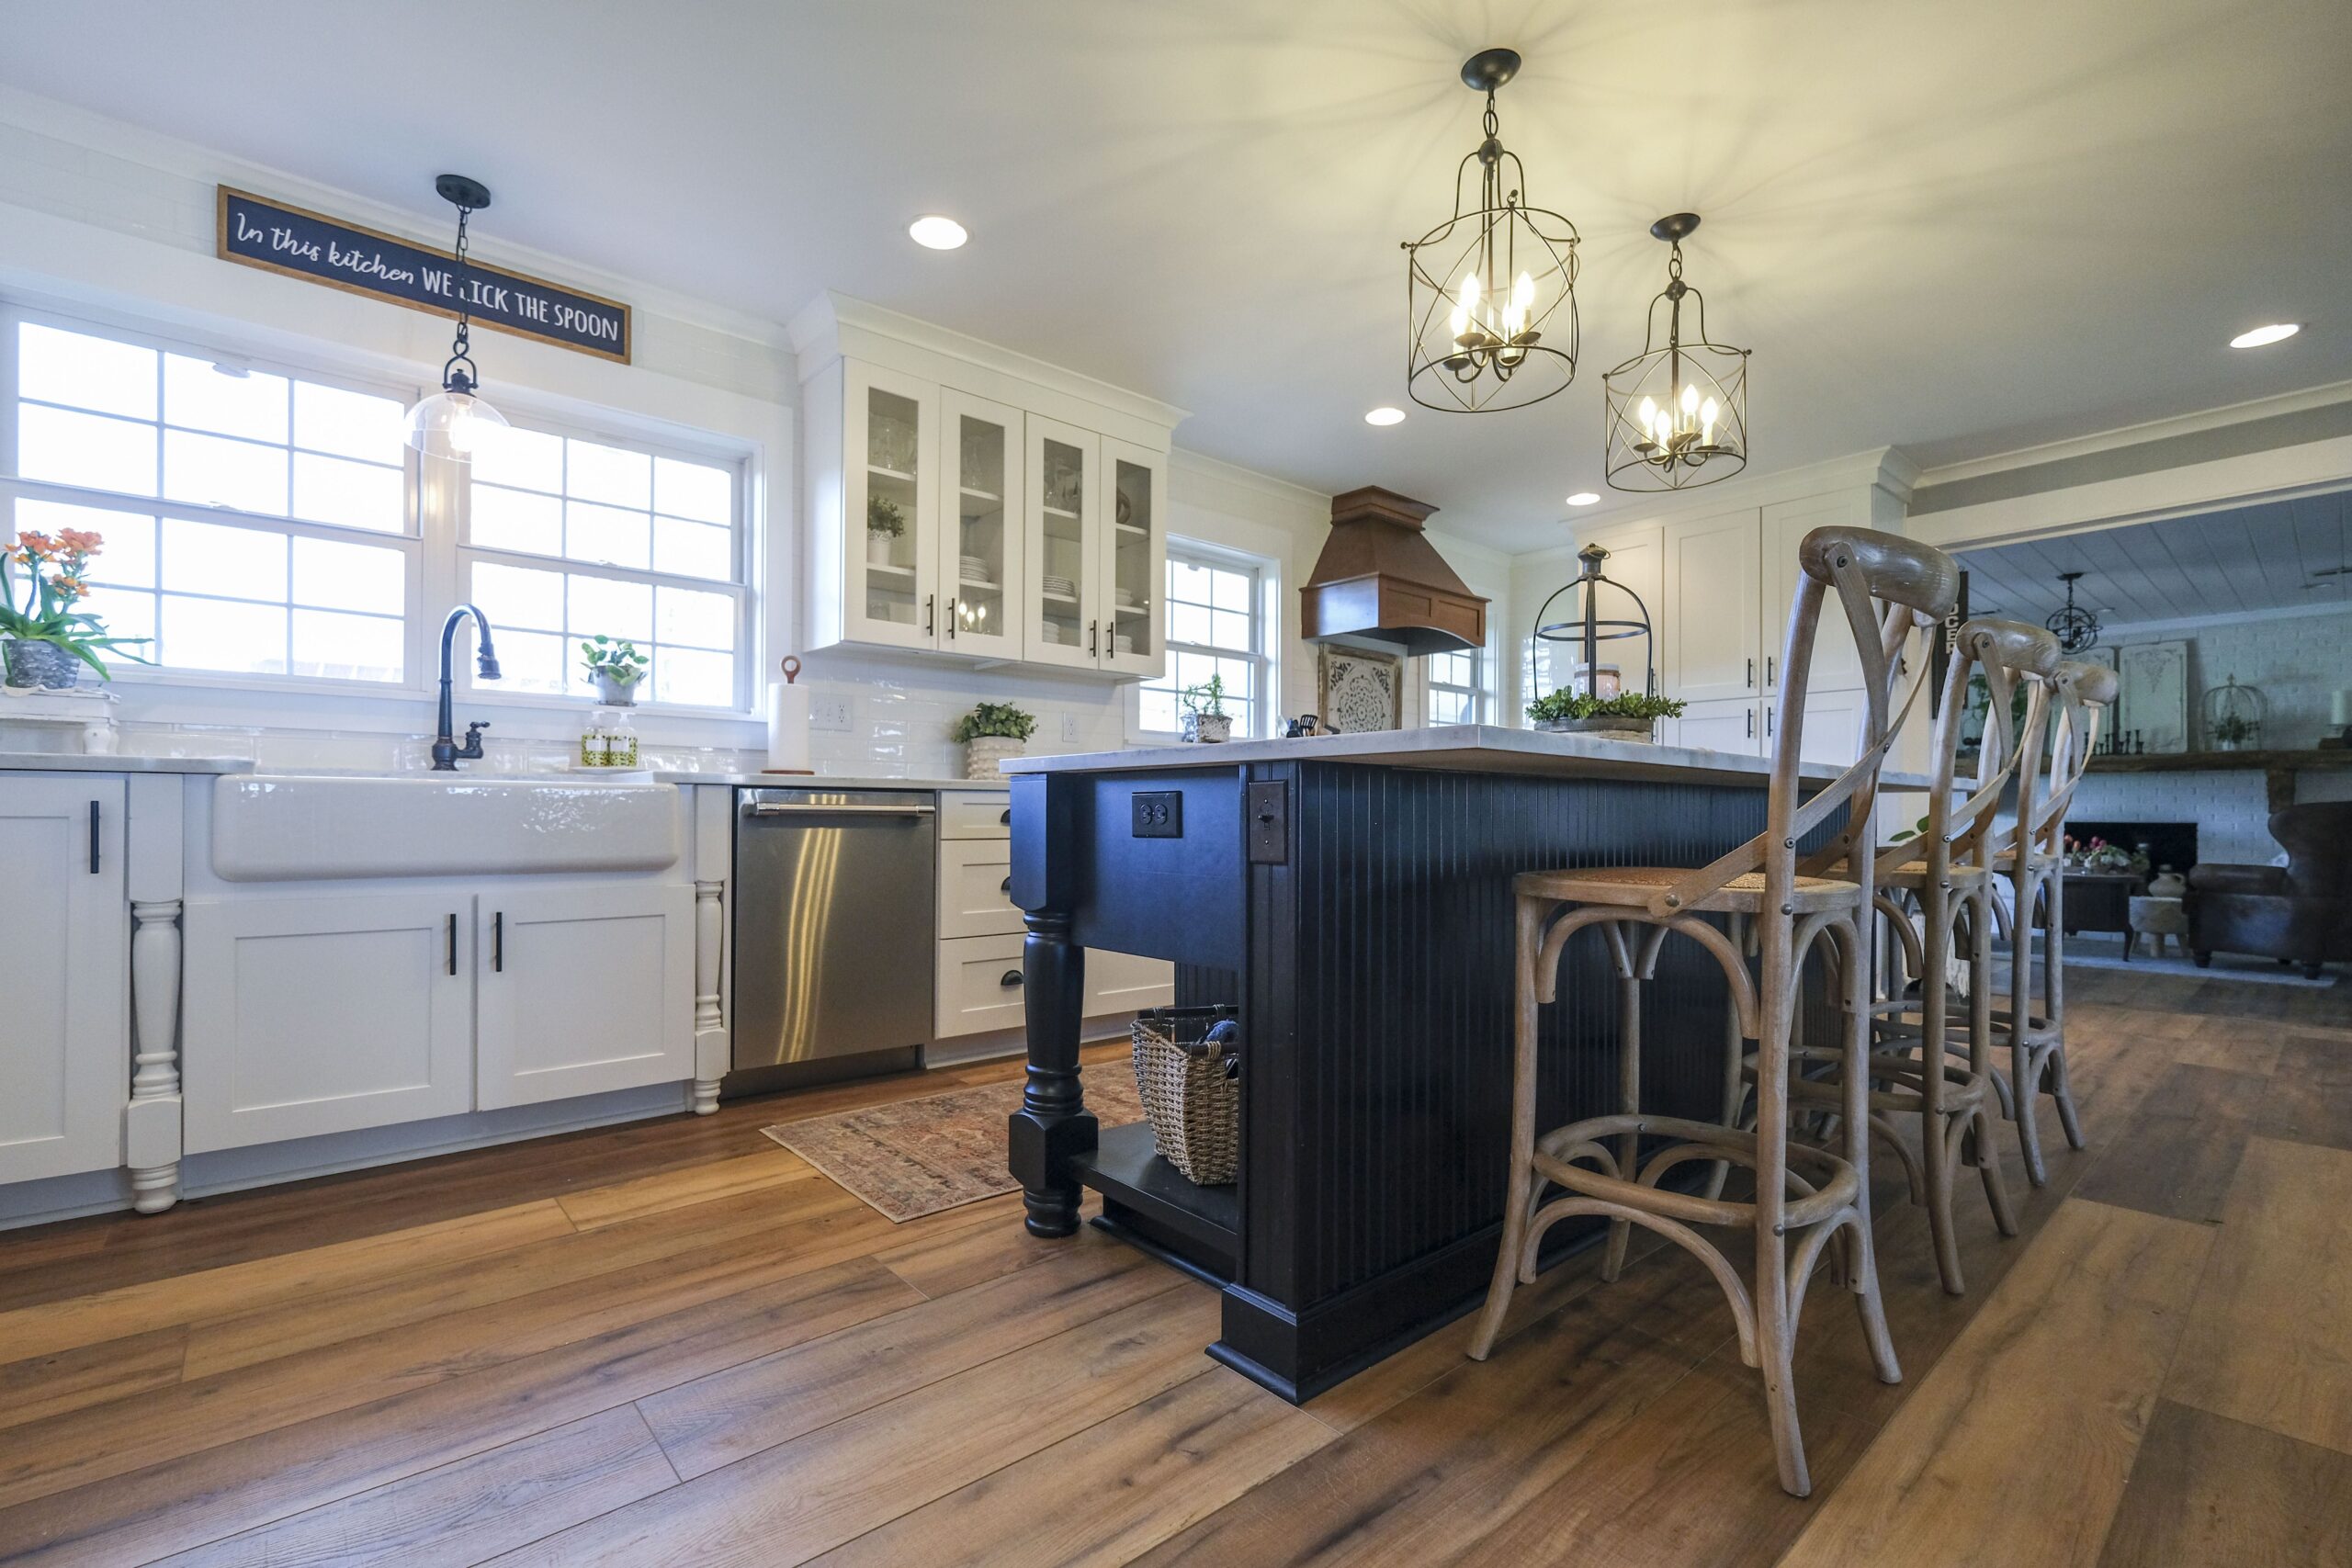 The Best Kitchen Remodeling Services for Your Home